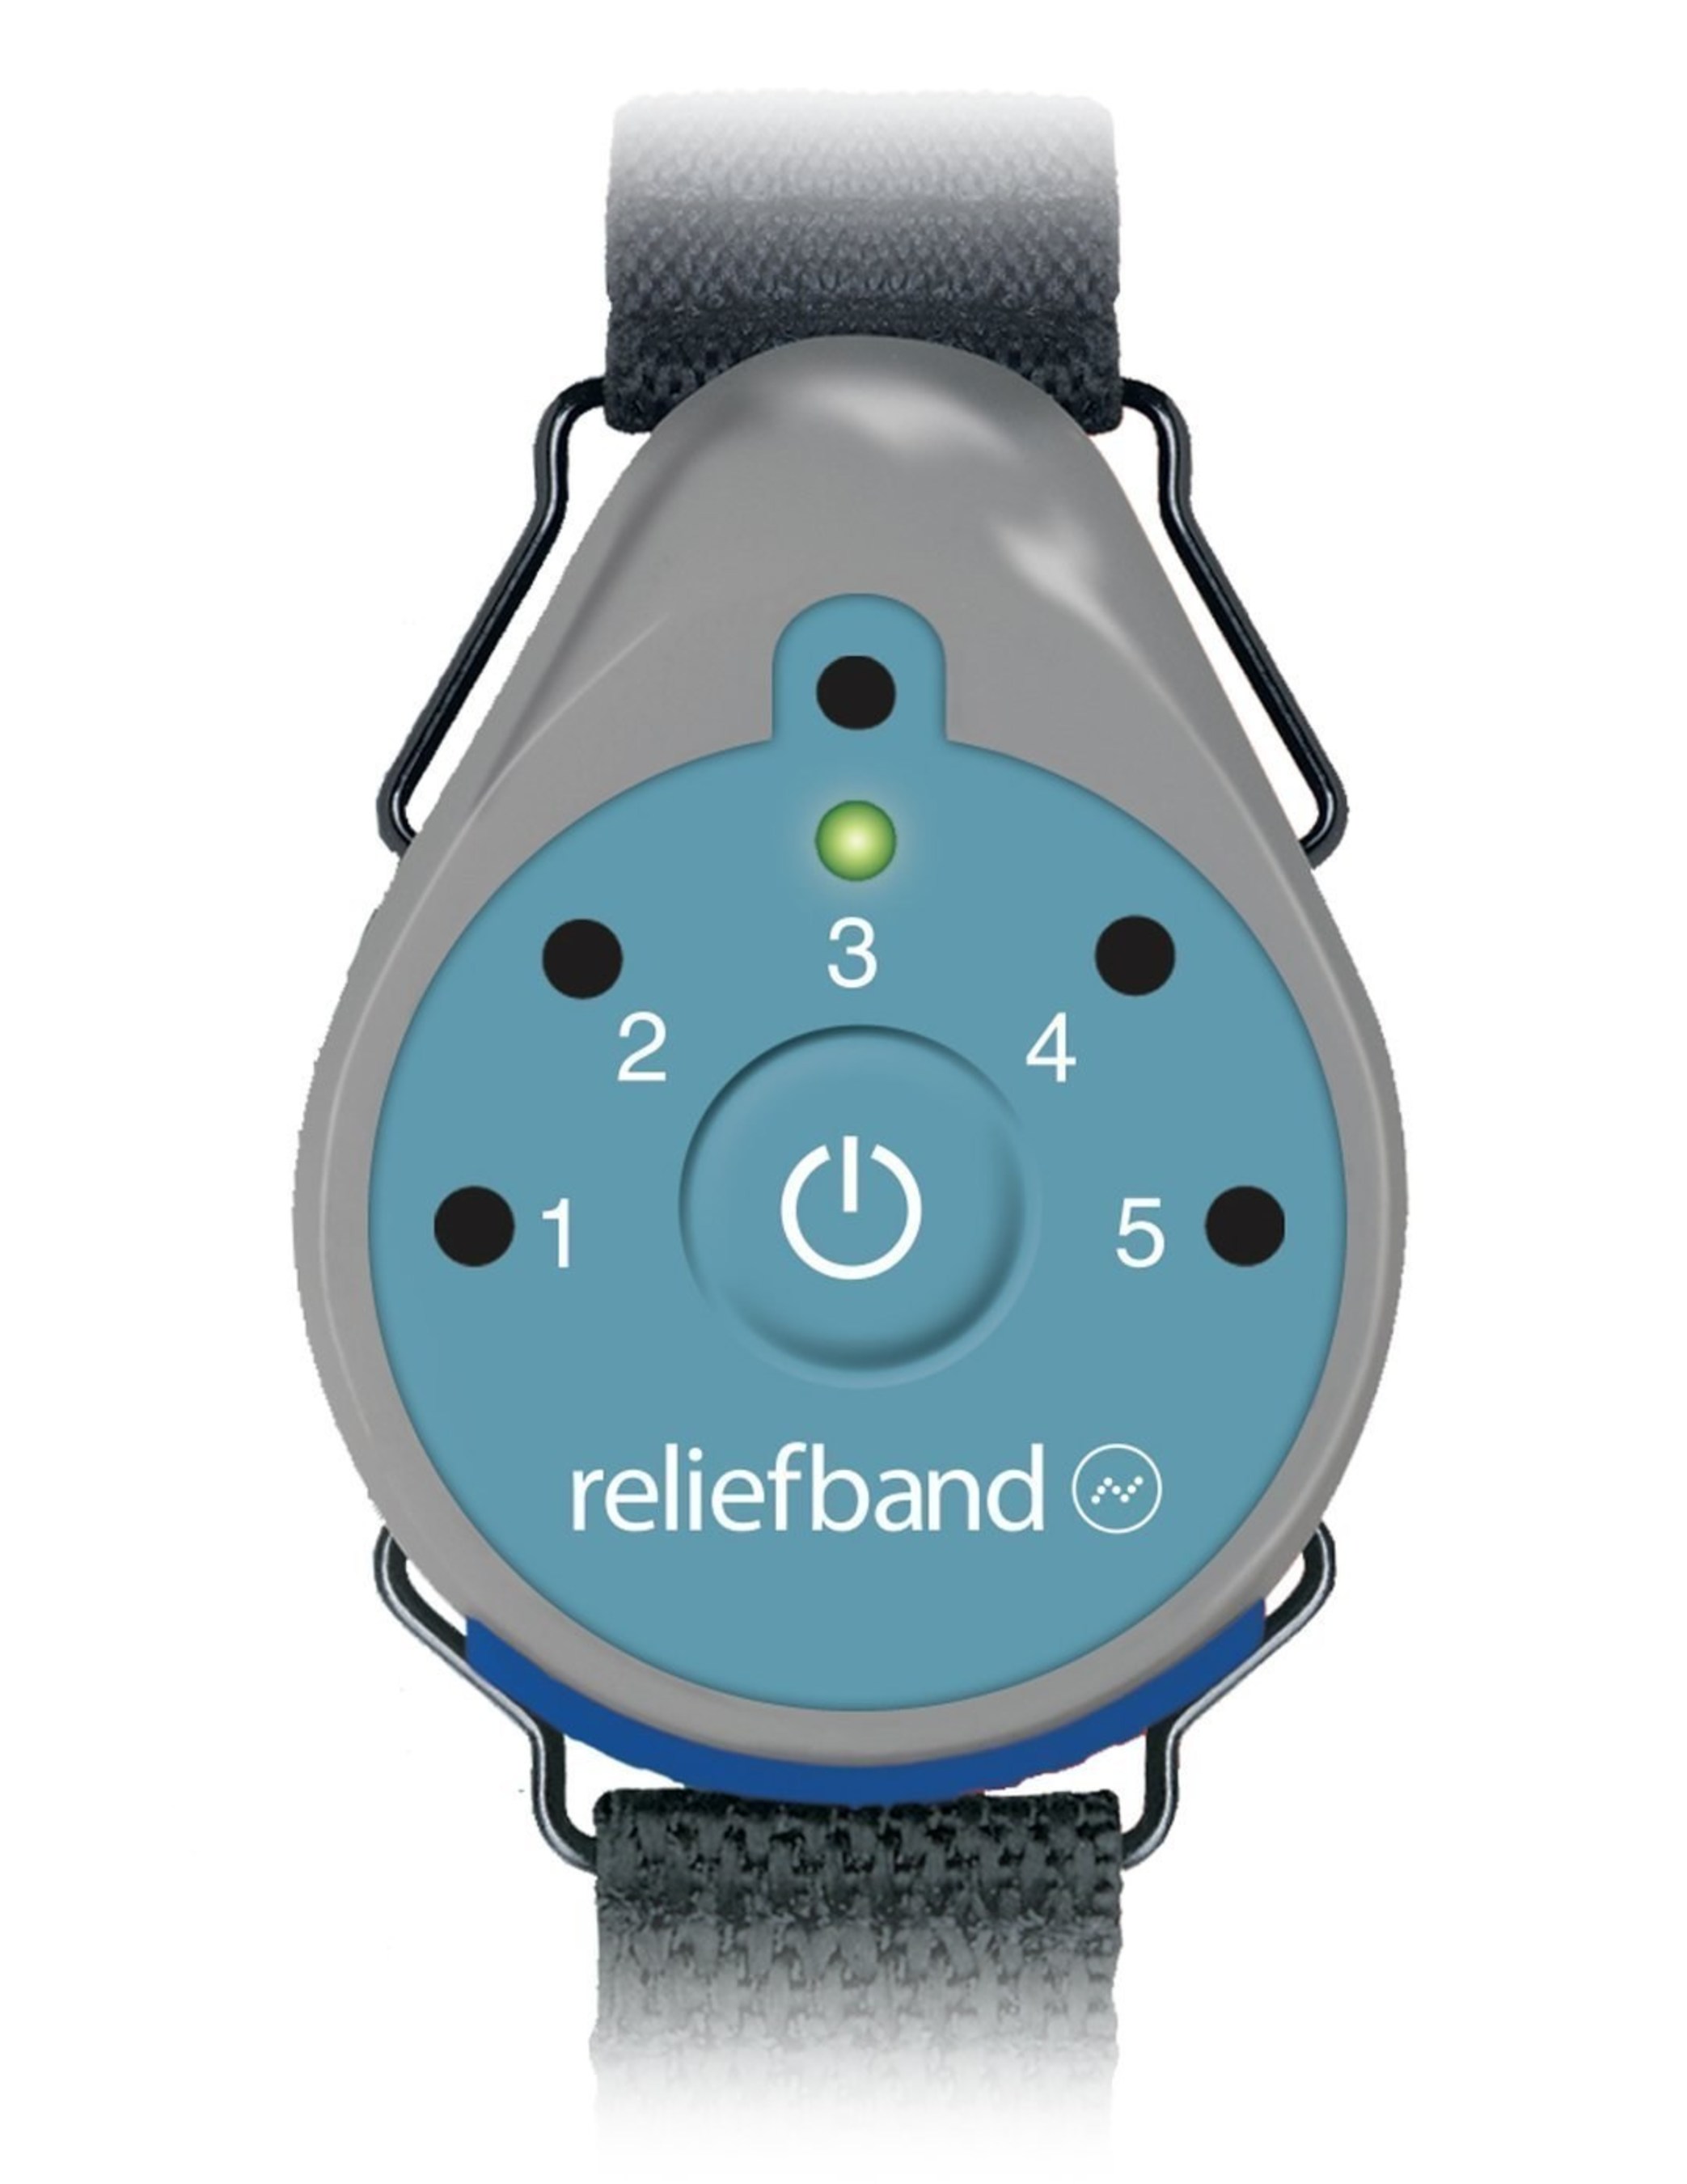 ReliefBand, an FDA cleared wearable device for the drug-free treatment of nausea and vomiting associated with morning and motion sickness.